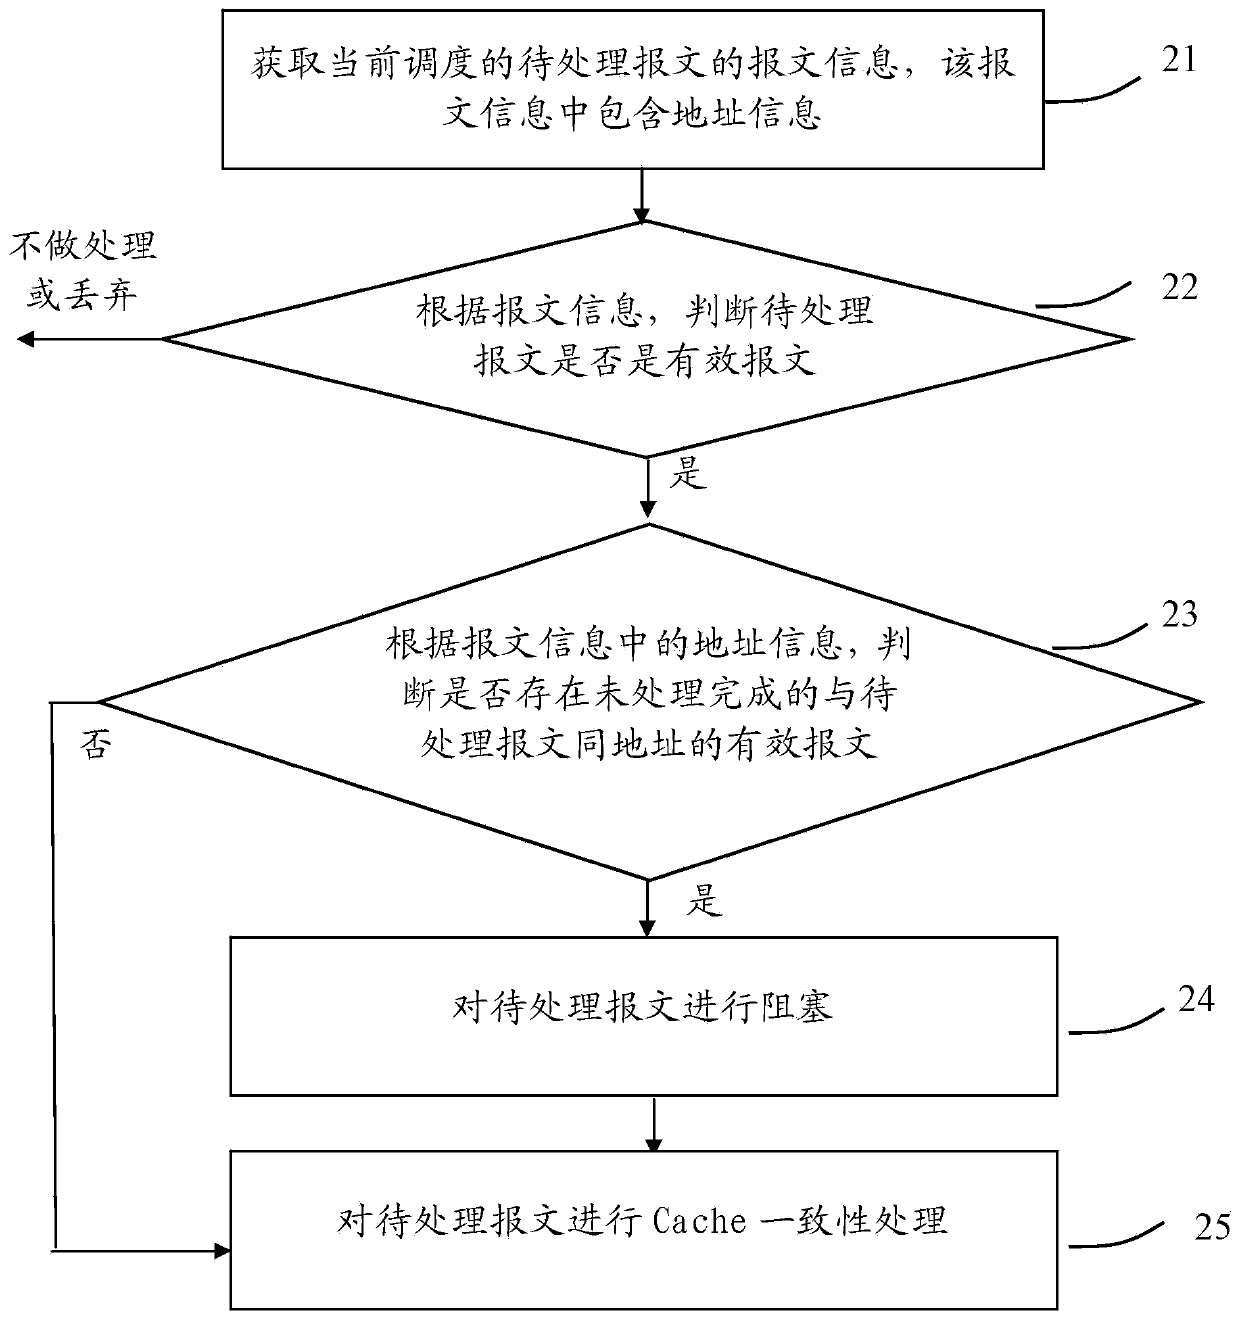 Multistage cache consistency pipeline processing method and device